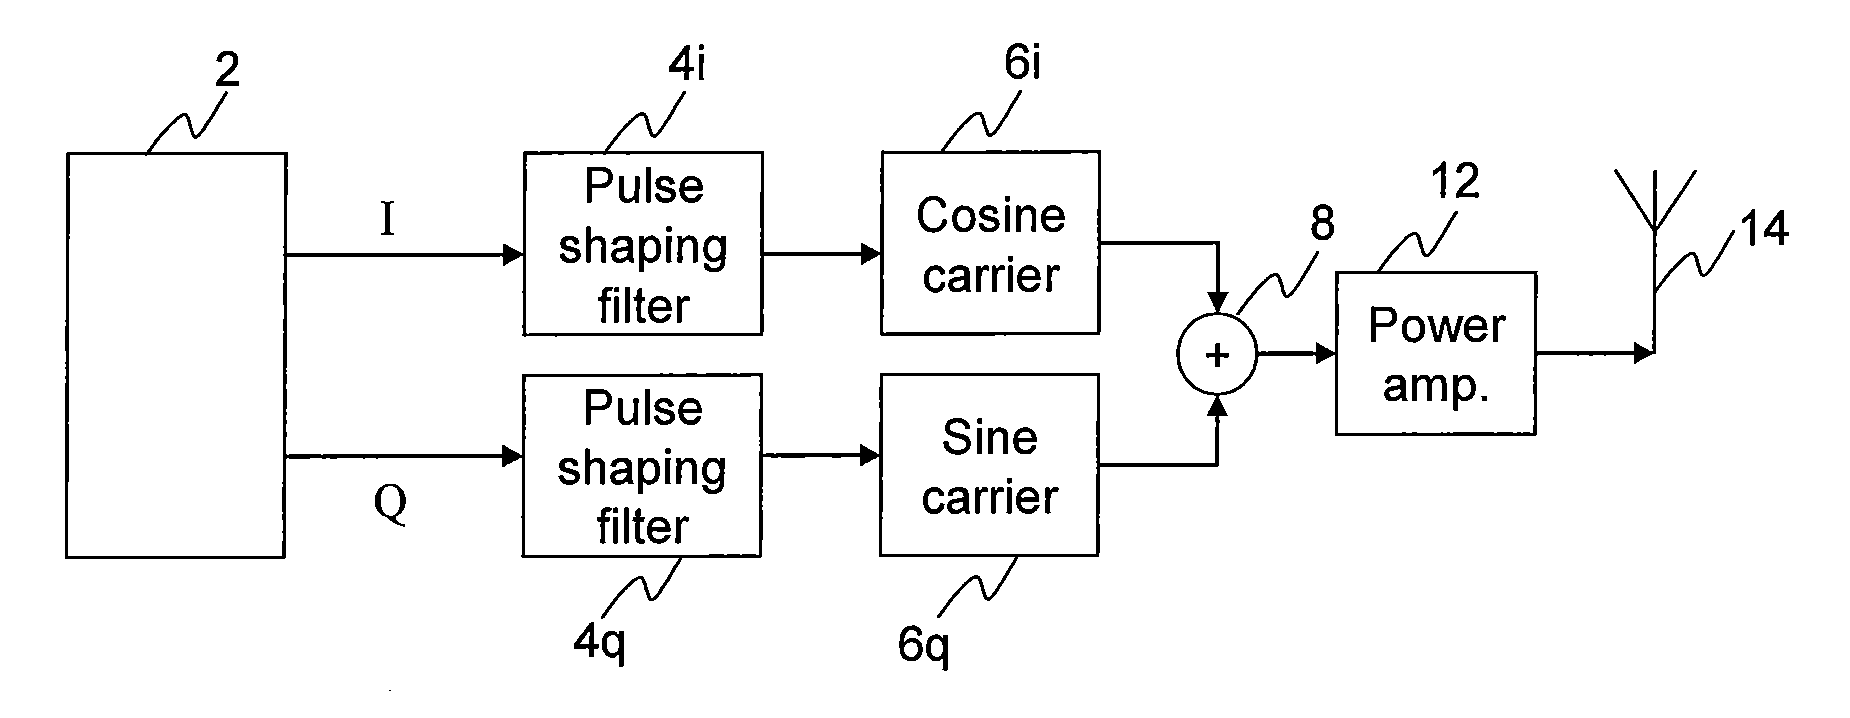 Transmitting a signal from a power amplifier